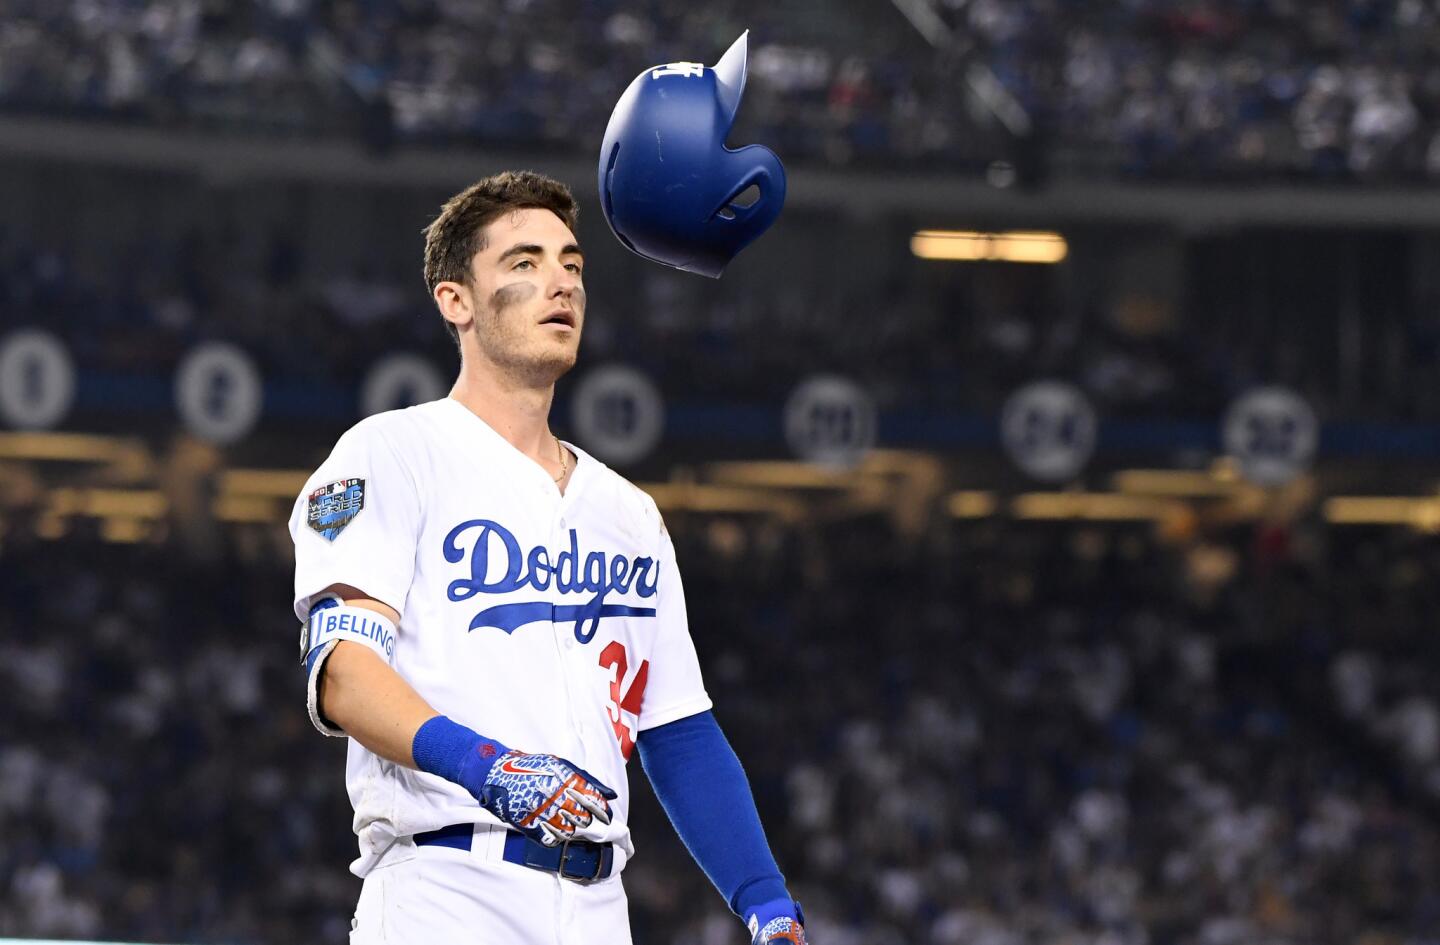 Dodgers Cody Bellinger flips his helmet after popping up against the Red Sox with a runner on base in the 6th inning.